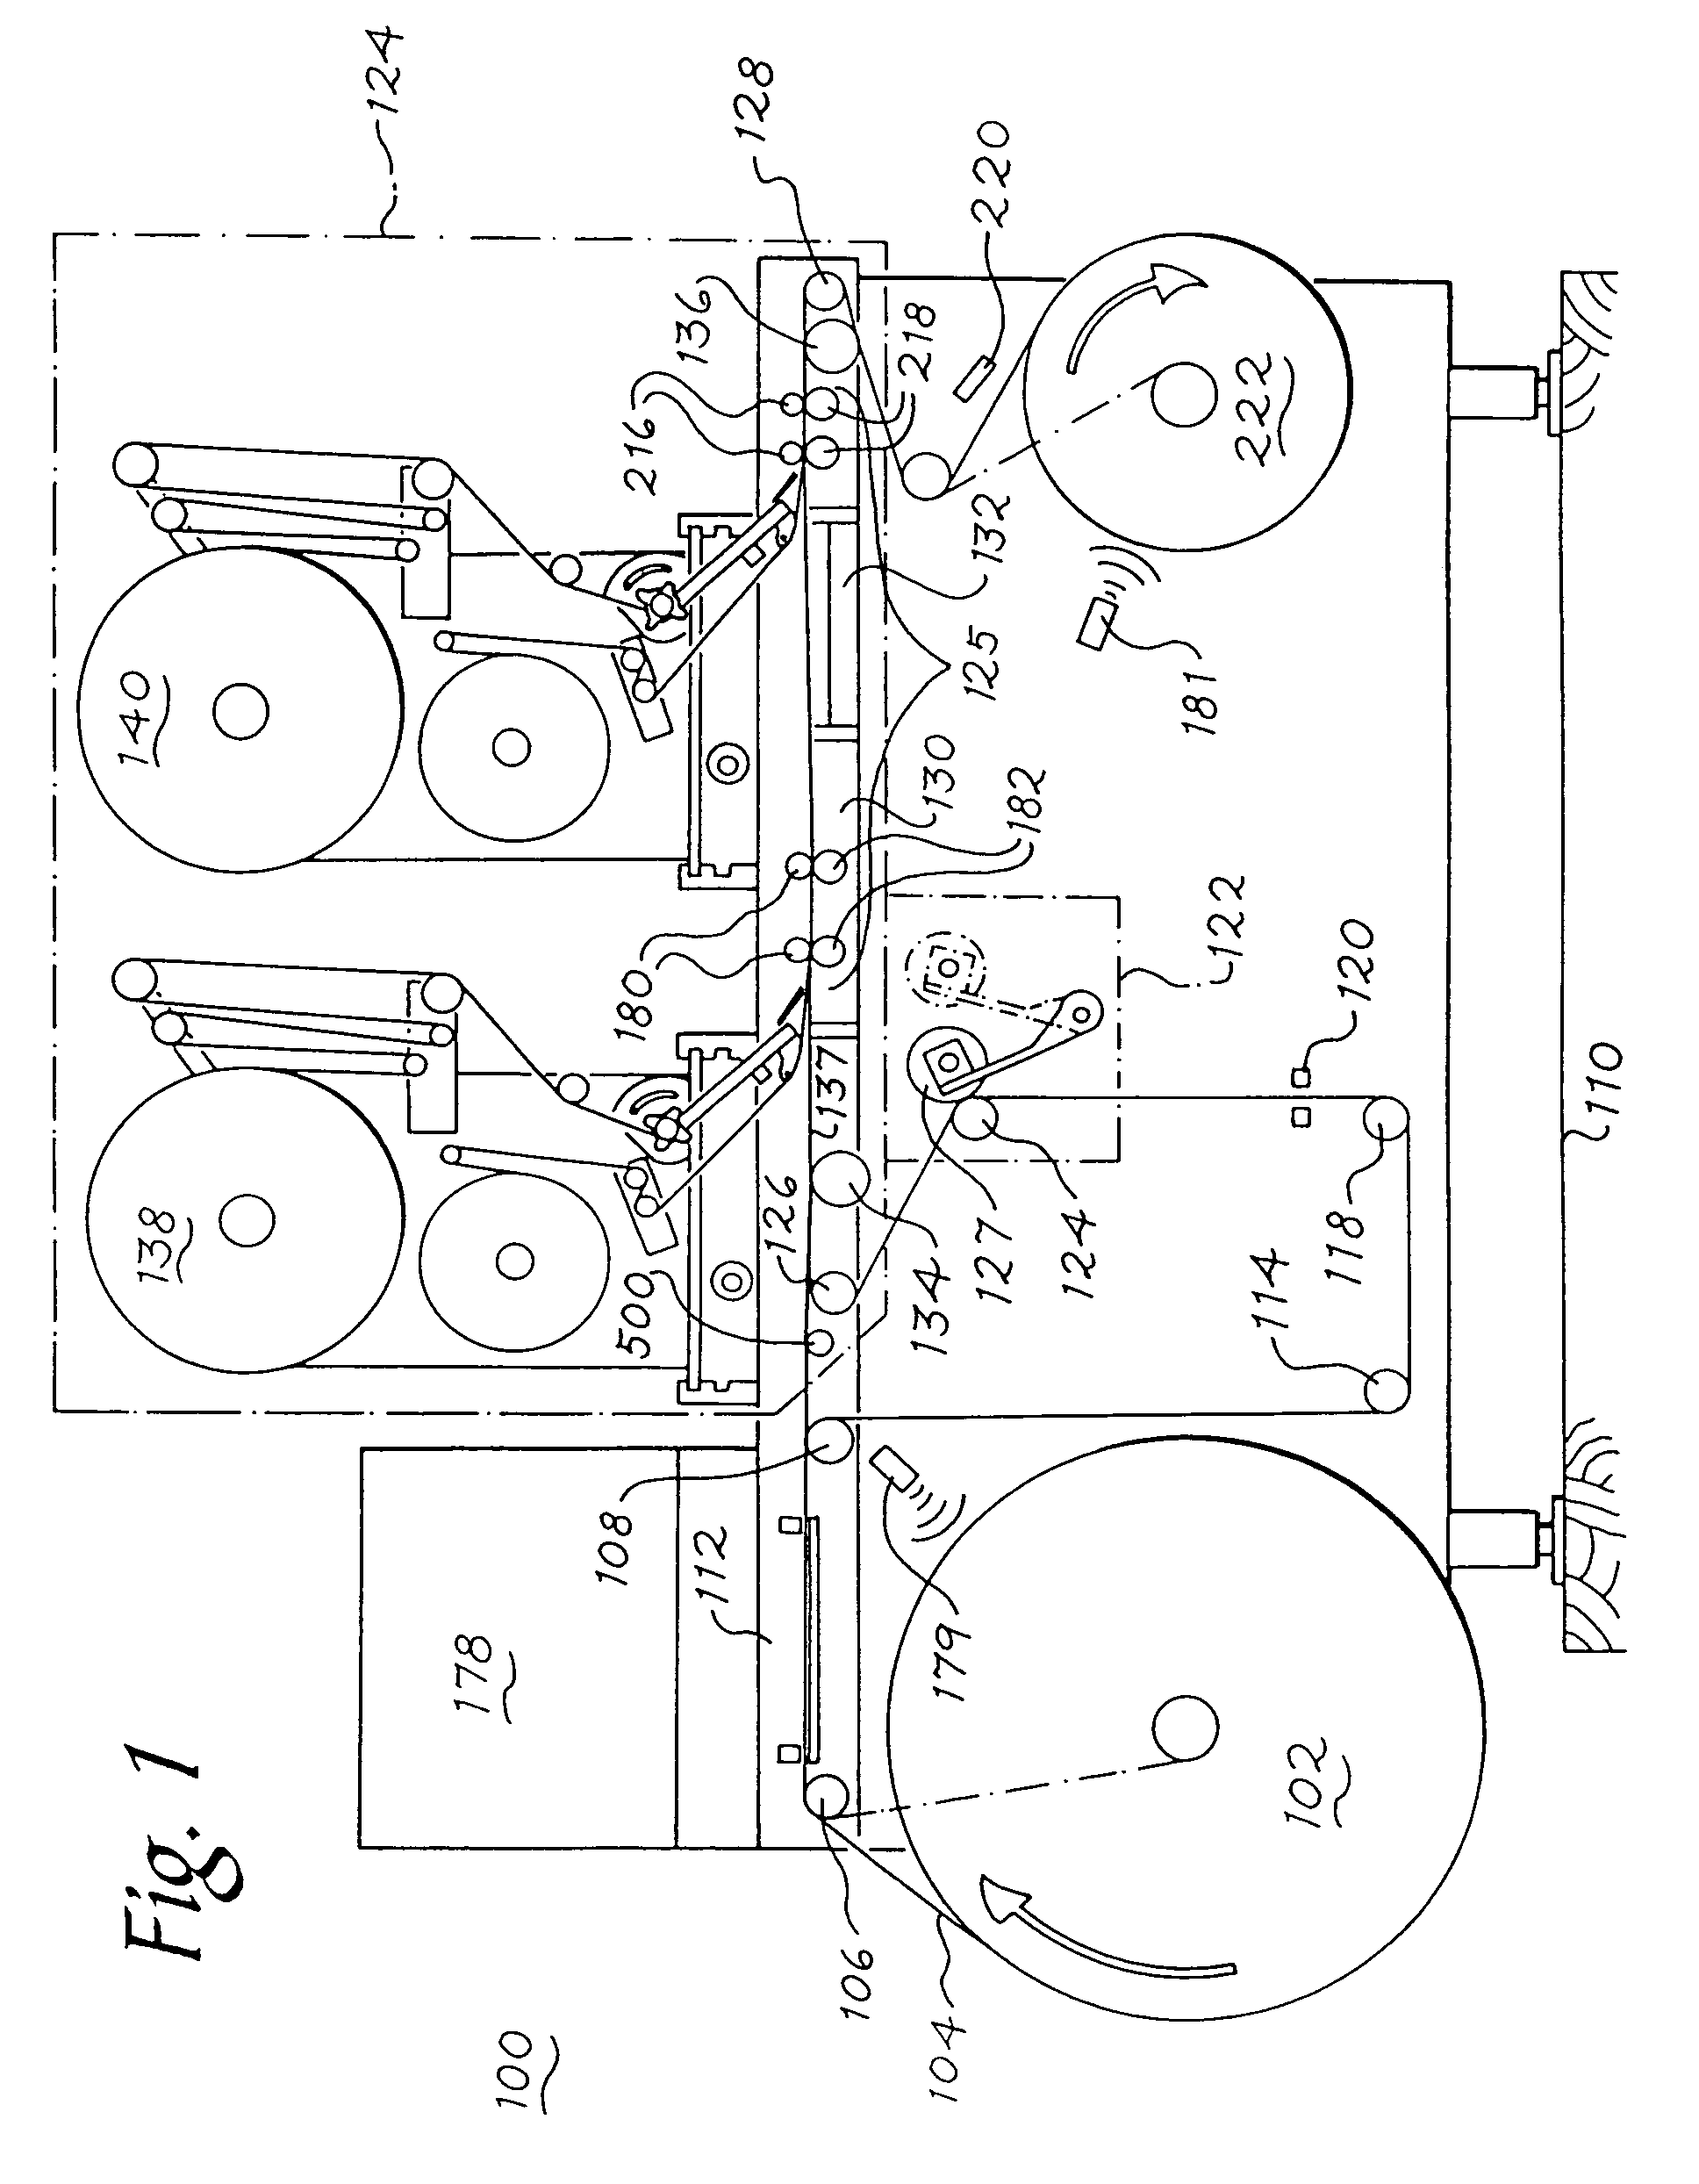 Machine and process for manufacturing a label with a security element